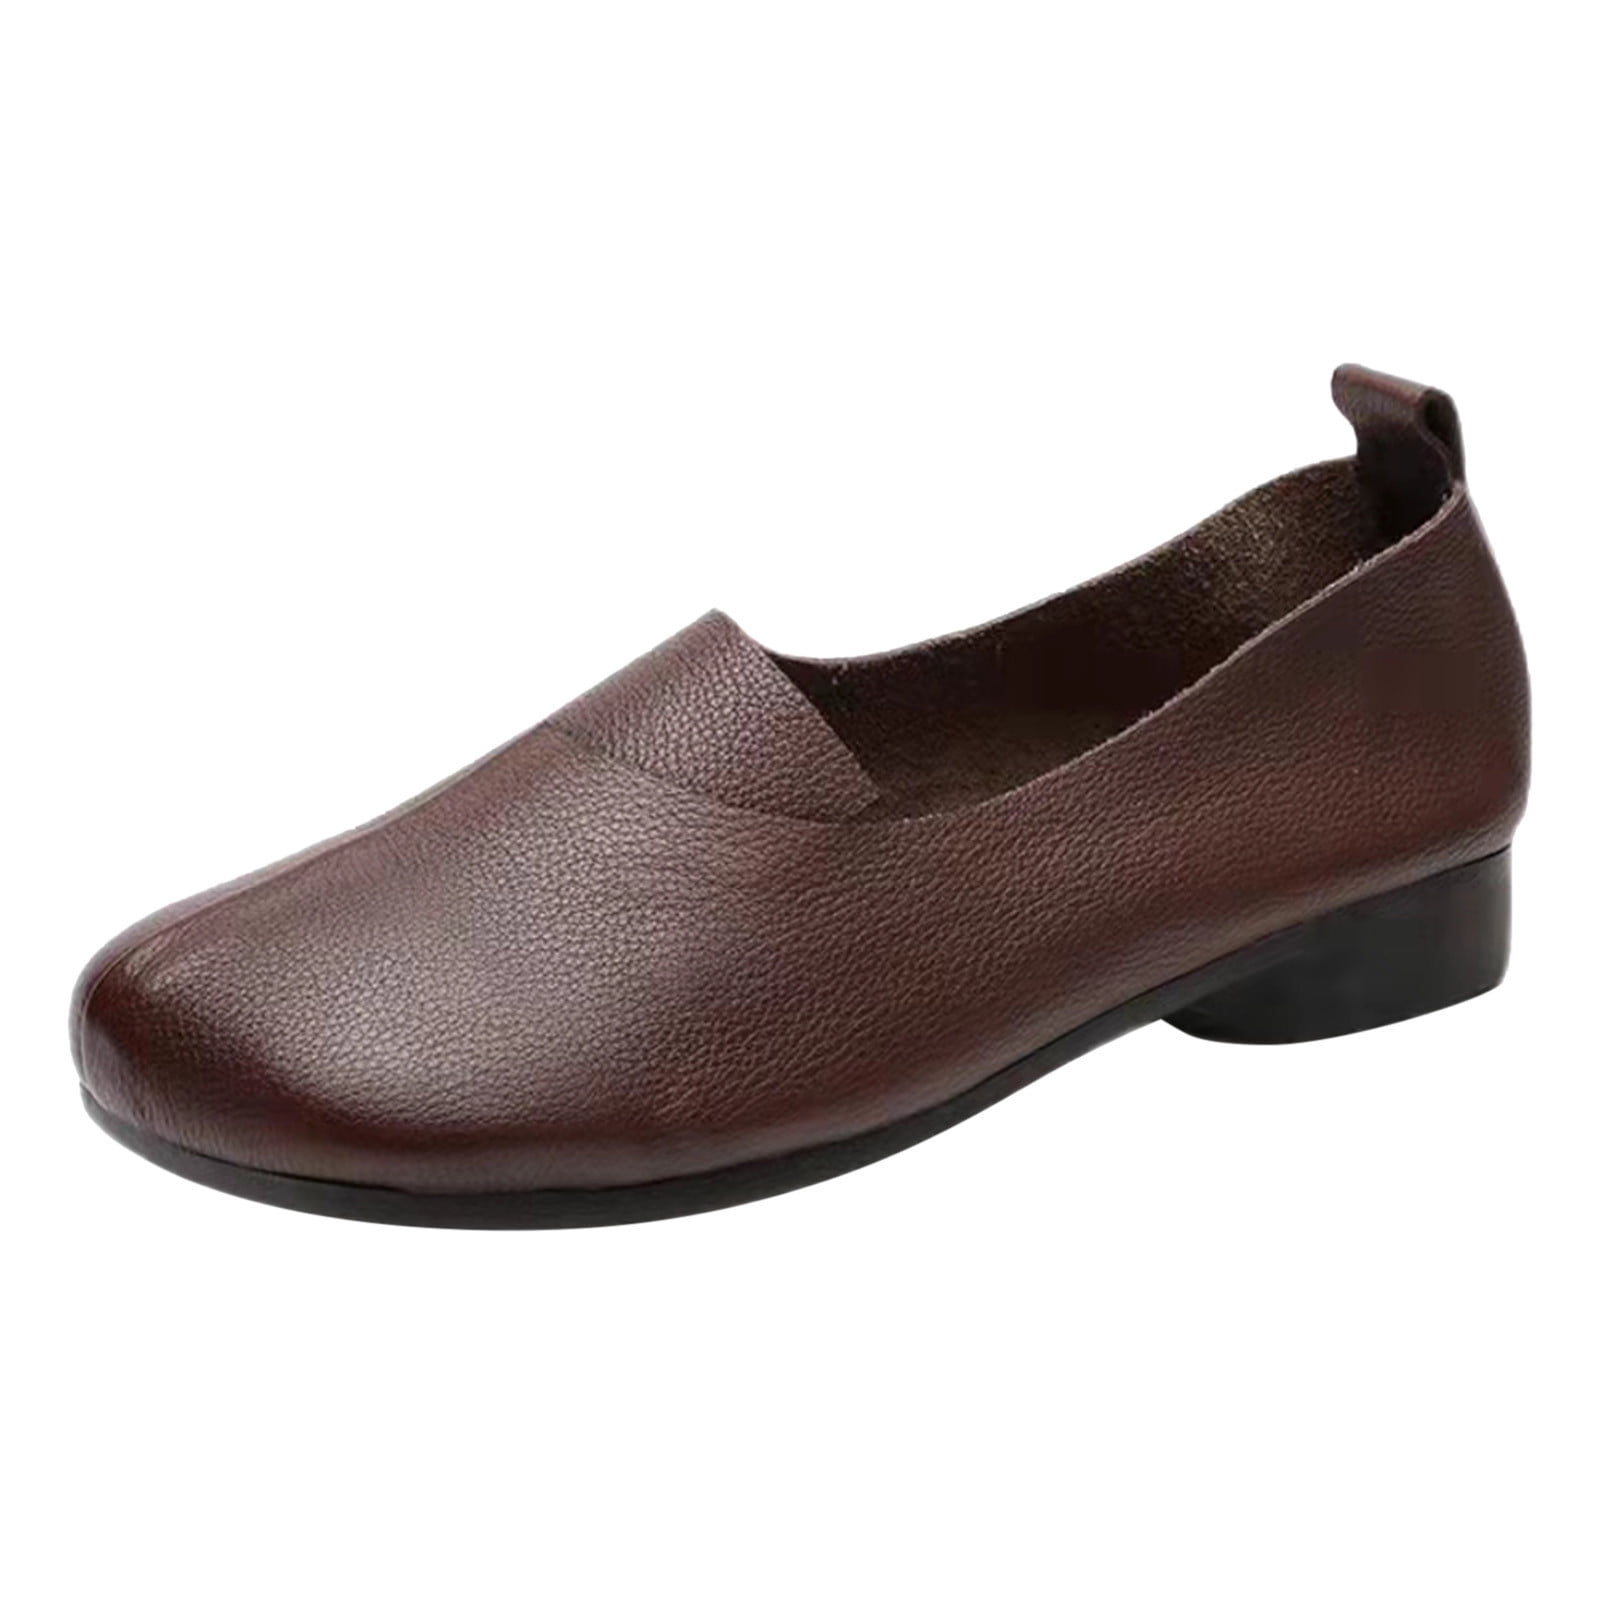 Towed22 Women's Flats Shoes Pointed Toe Bow Leather Ballet Flats Dress 